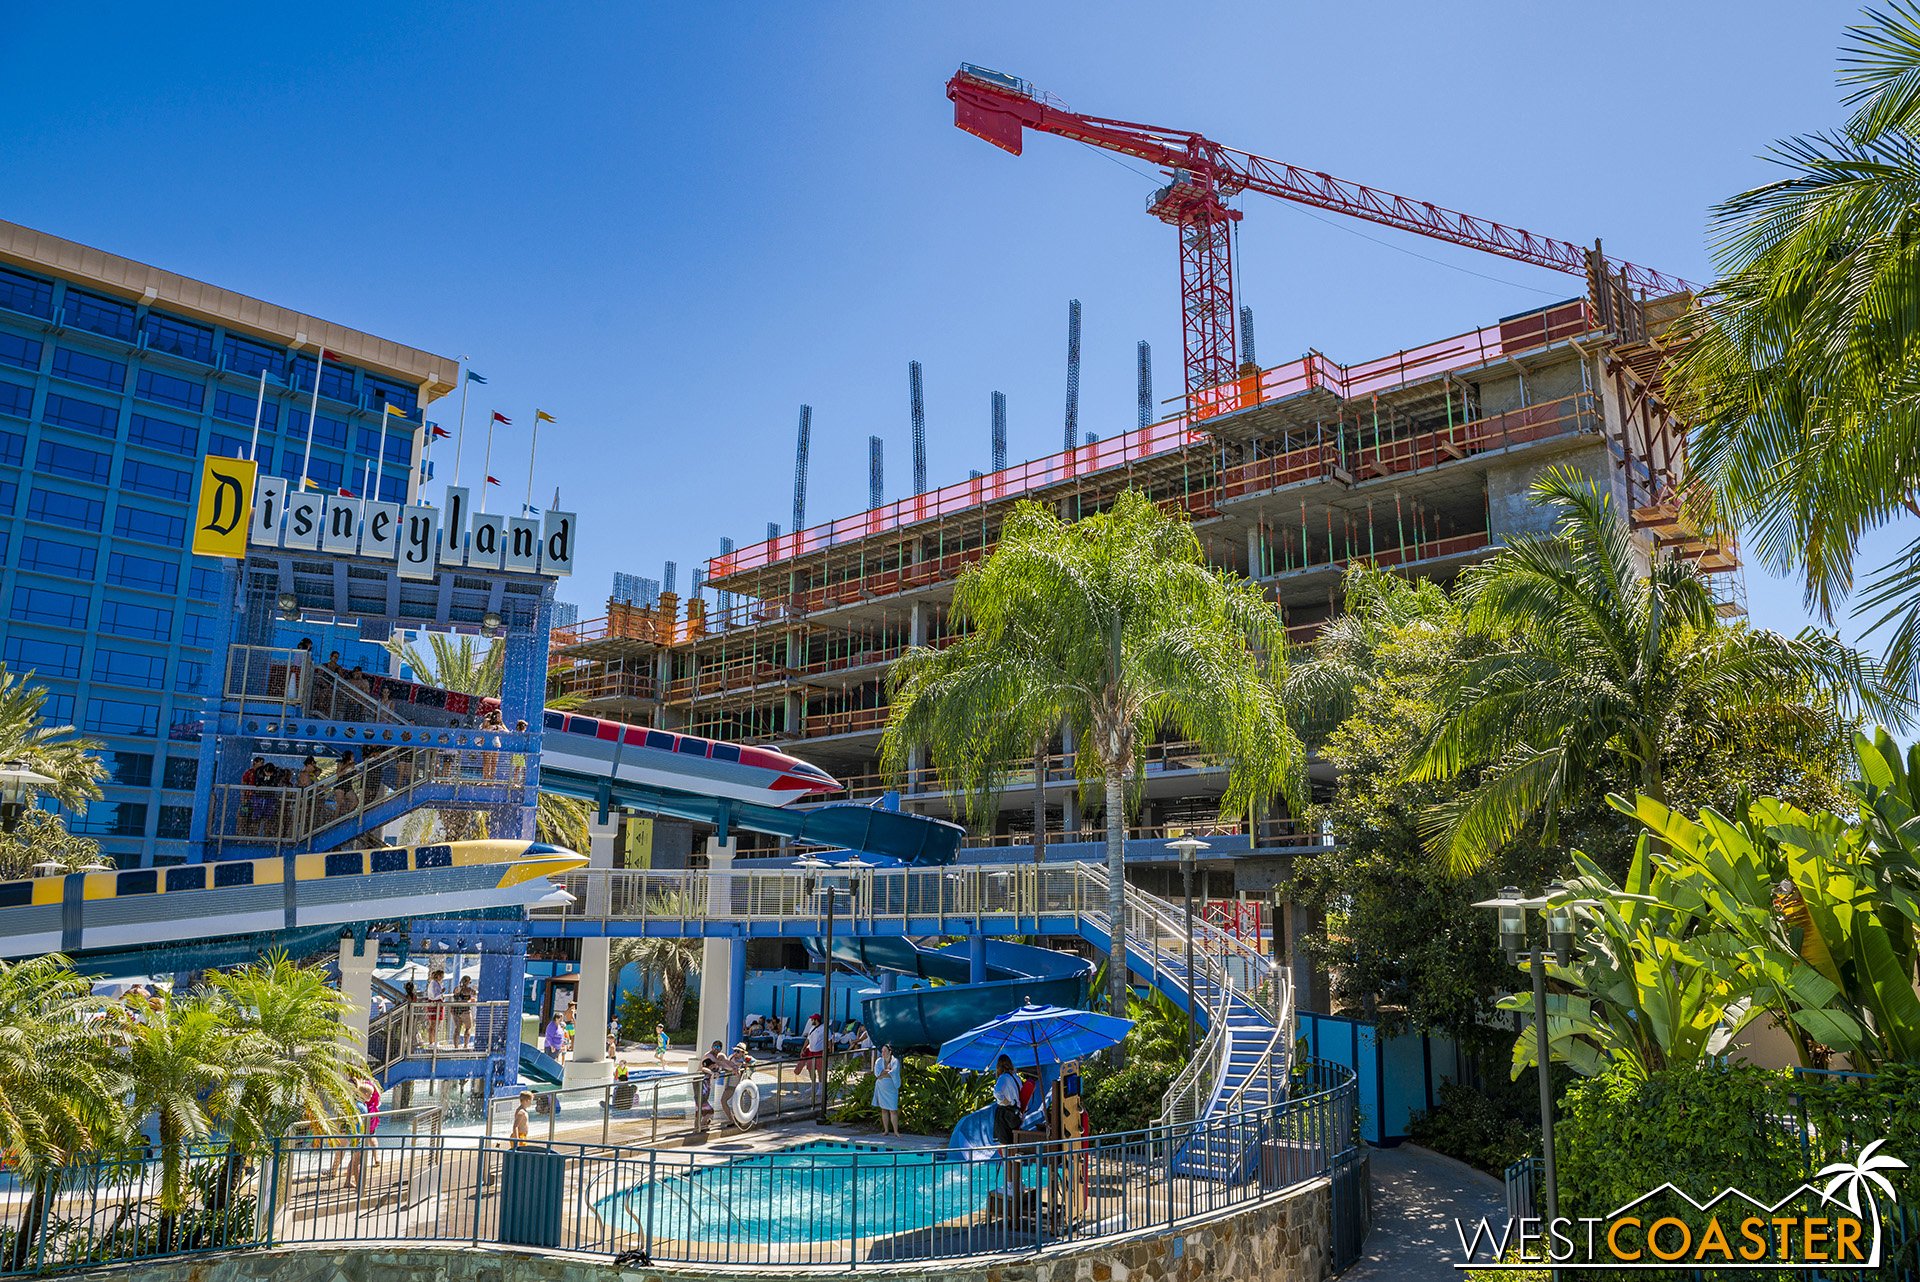  The new Disney Vacation Club tower is going up at the Disneyland Hotel. 